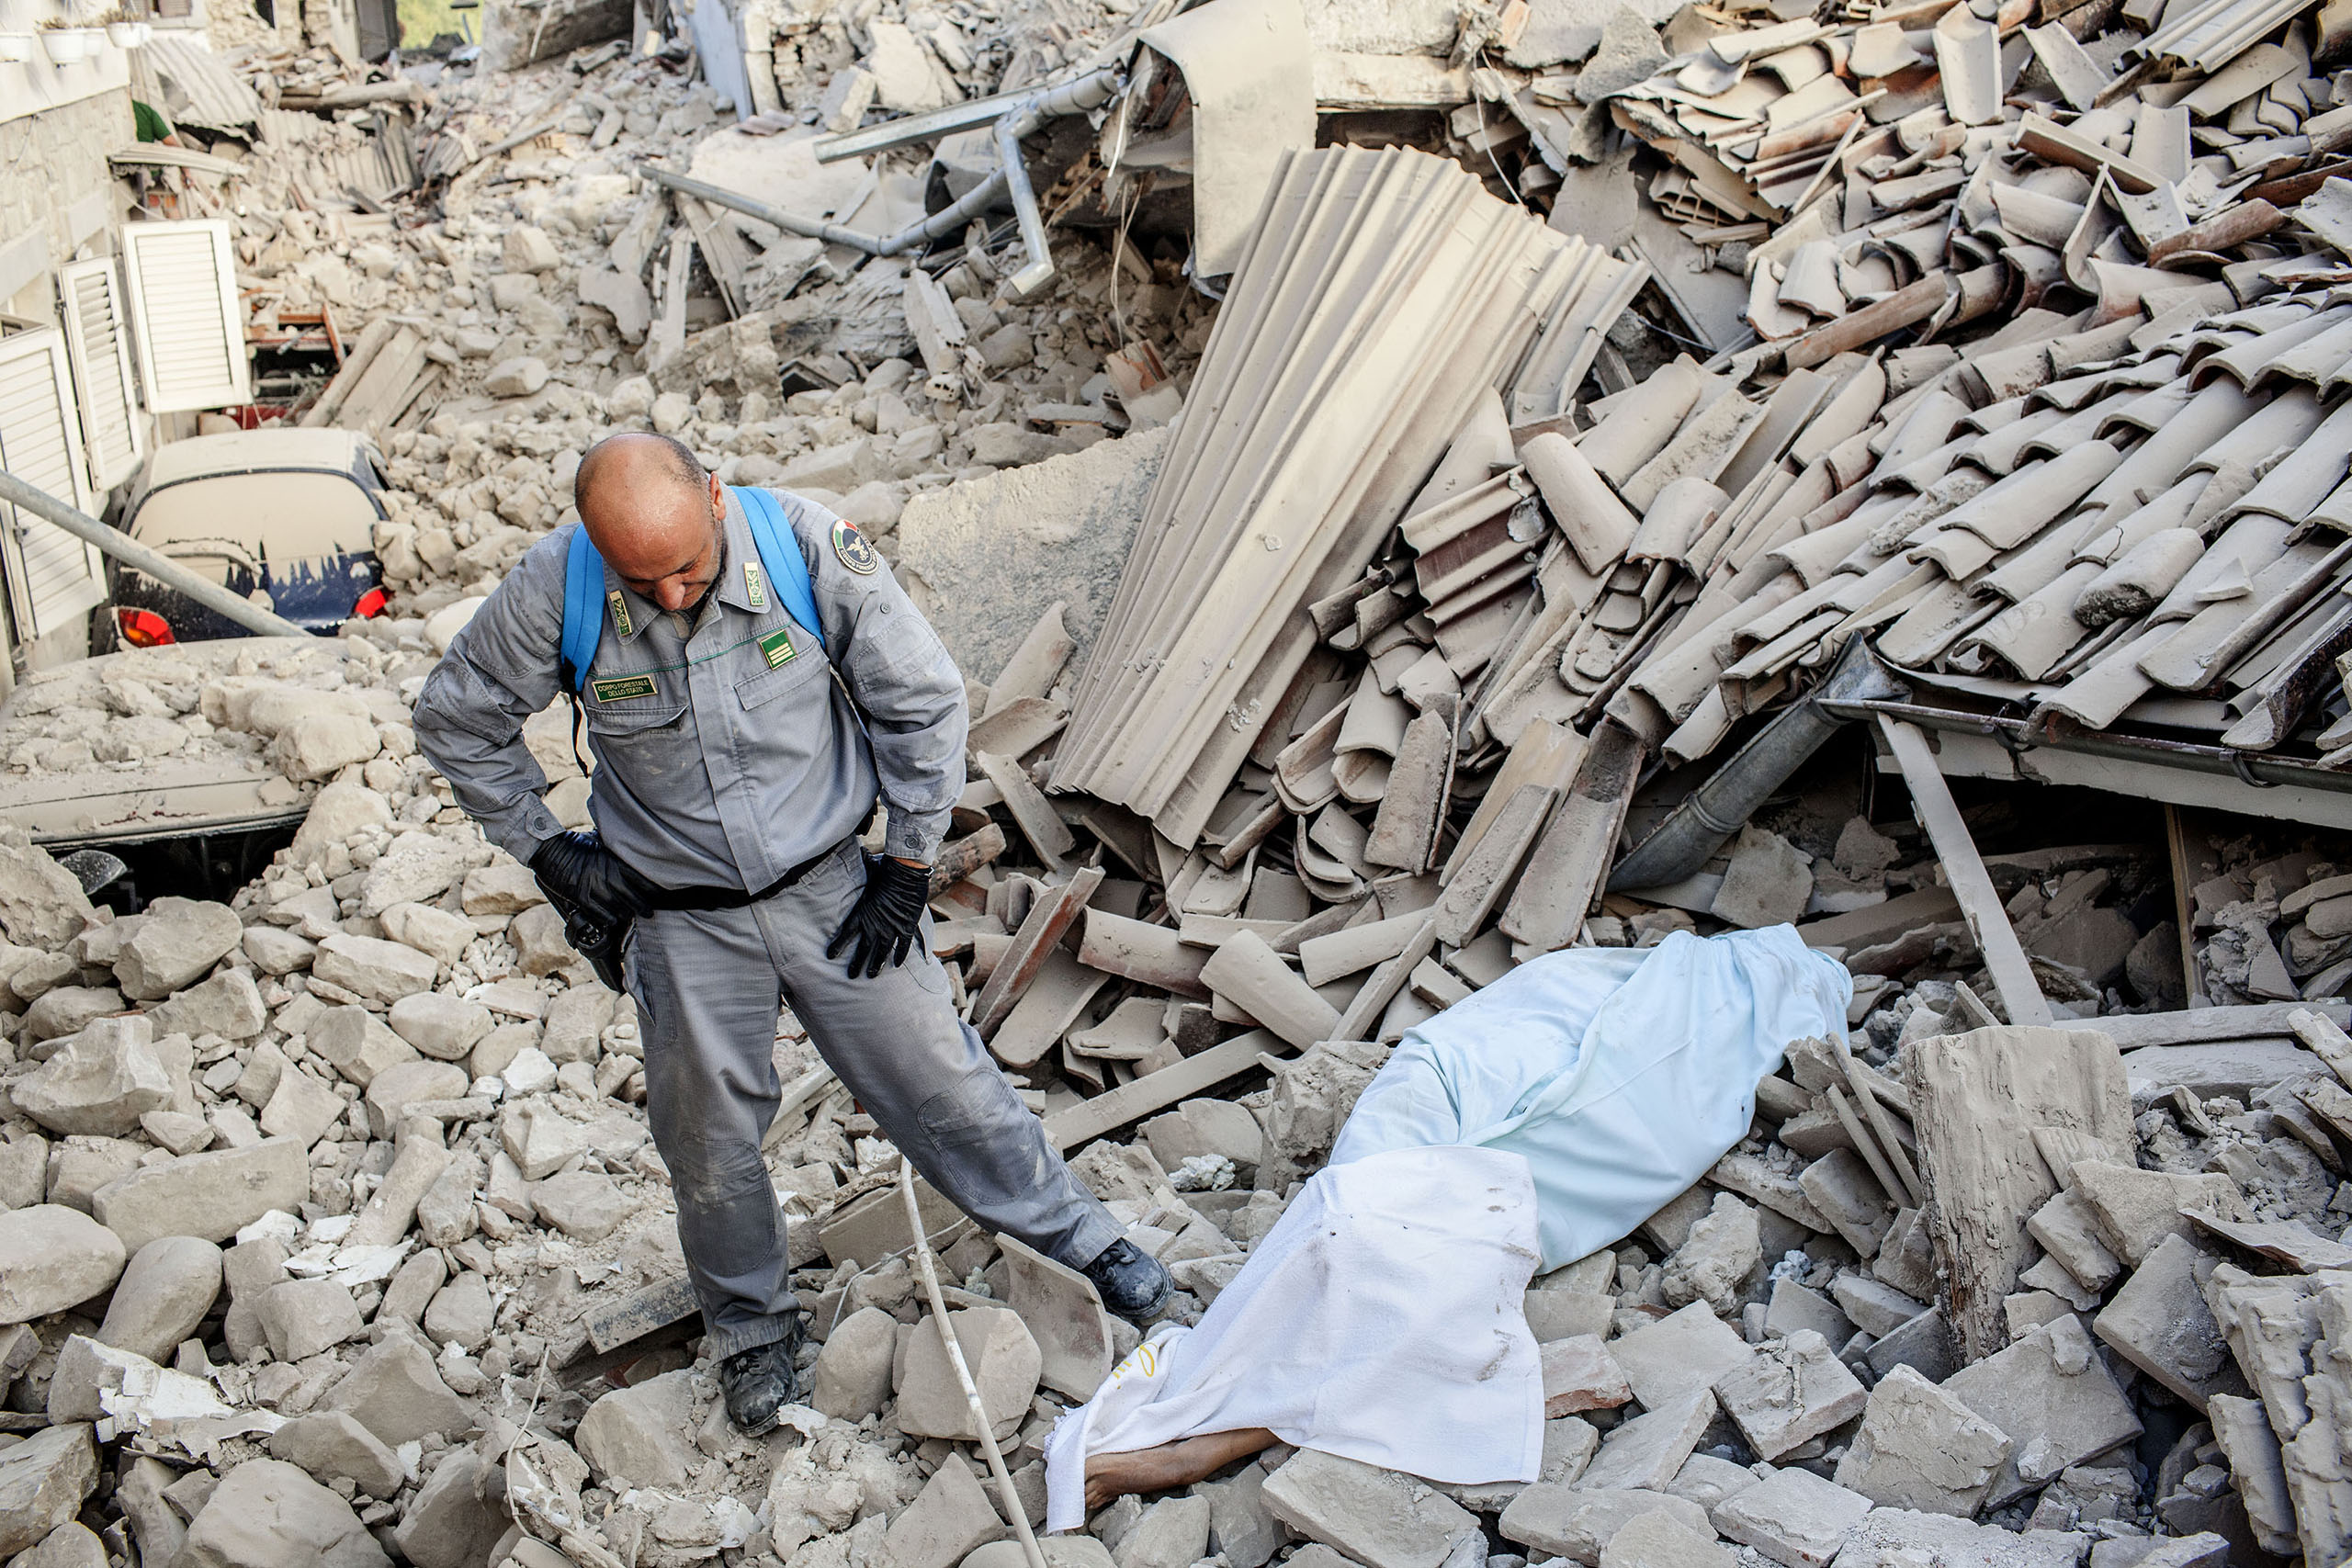 A rescuer stands beside the body of a man pulled from the rubble in the town of Amatrice, Italy, on Aug. 24, 2016.